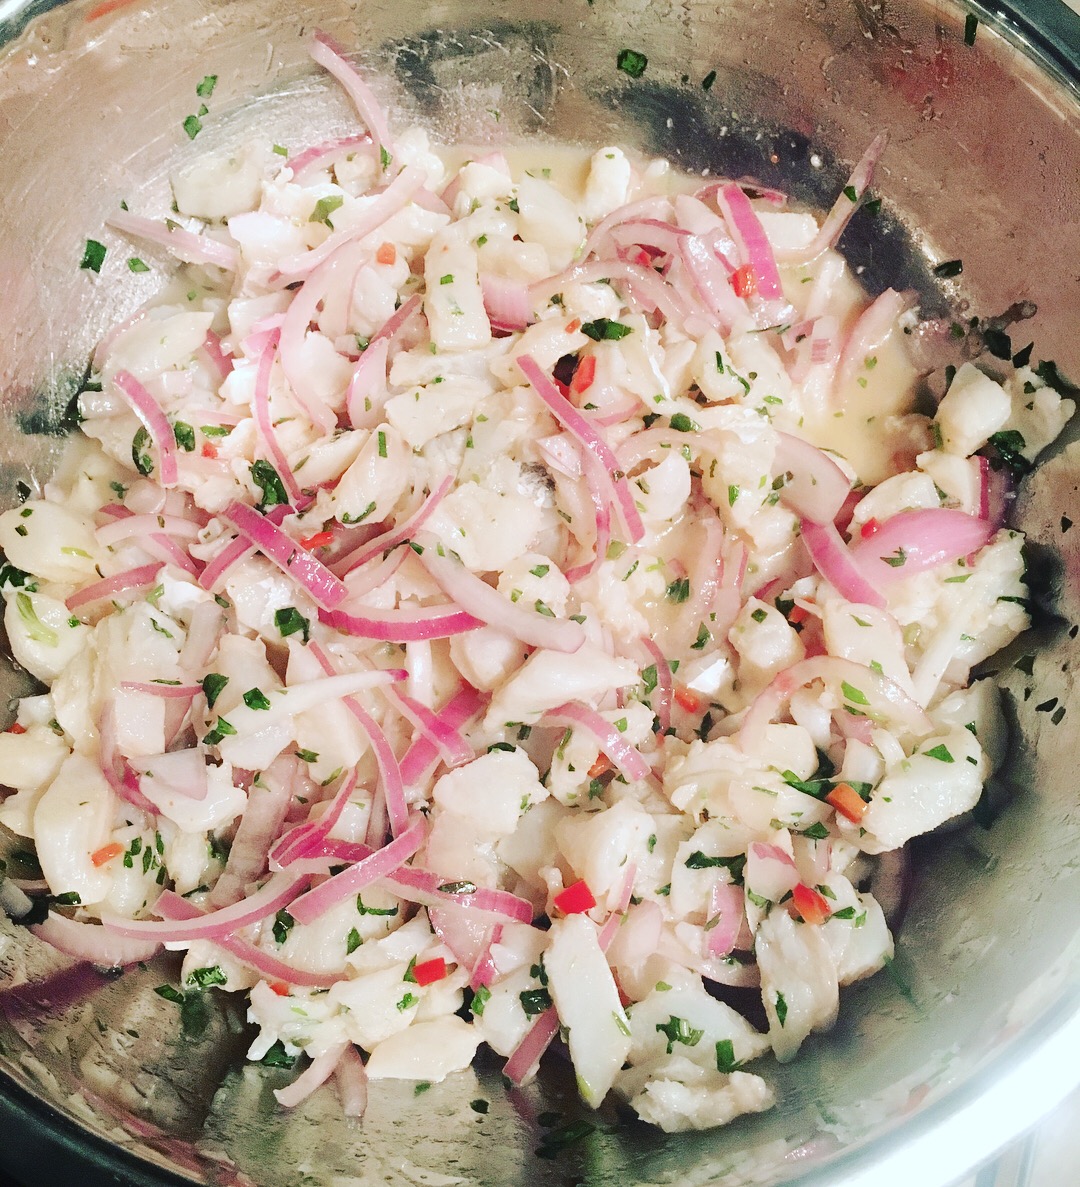 How to make it: Ceviche